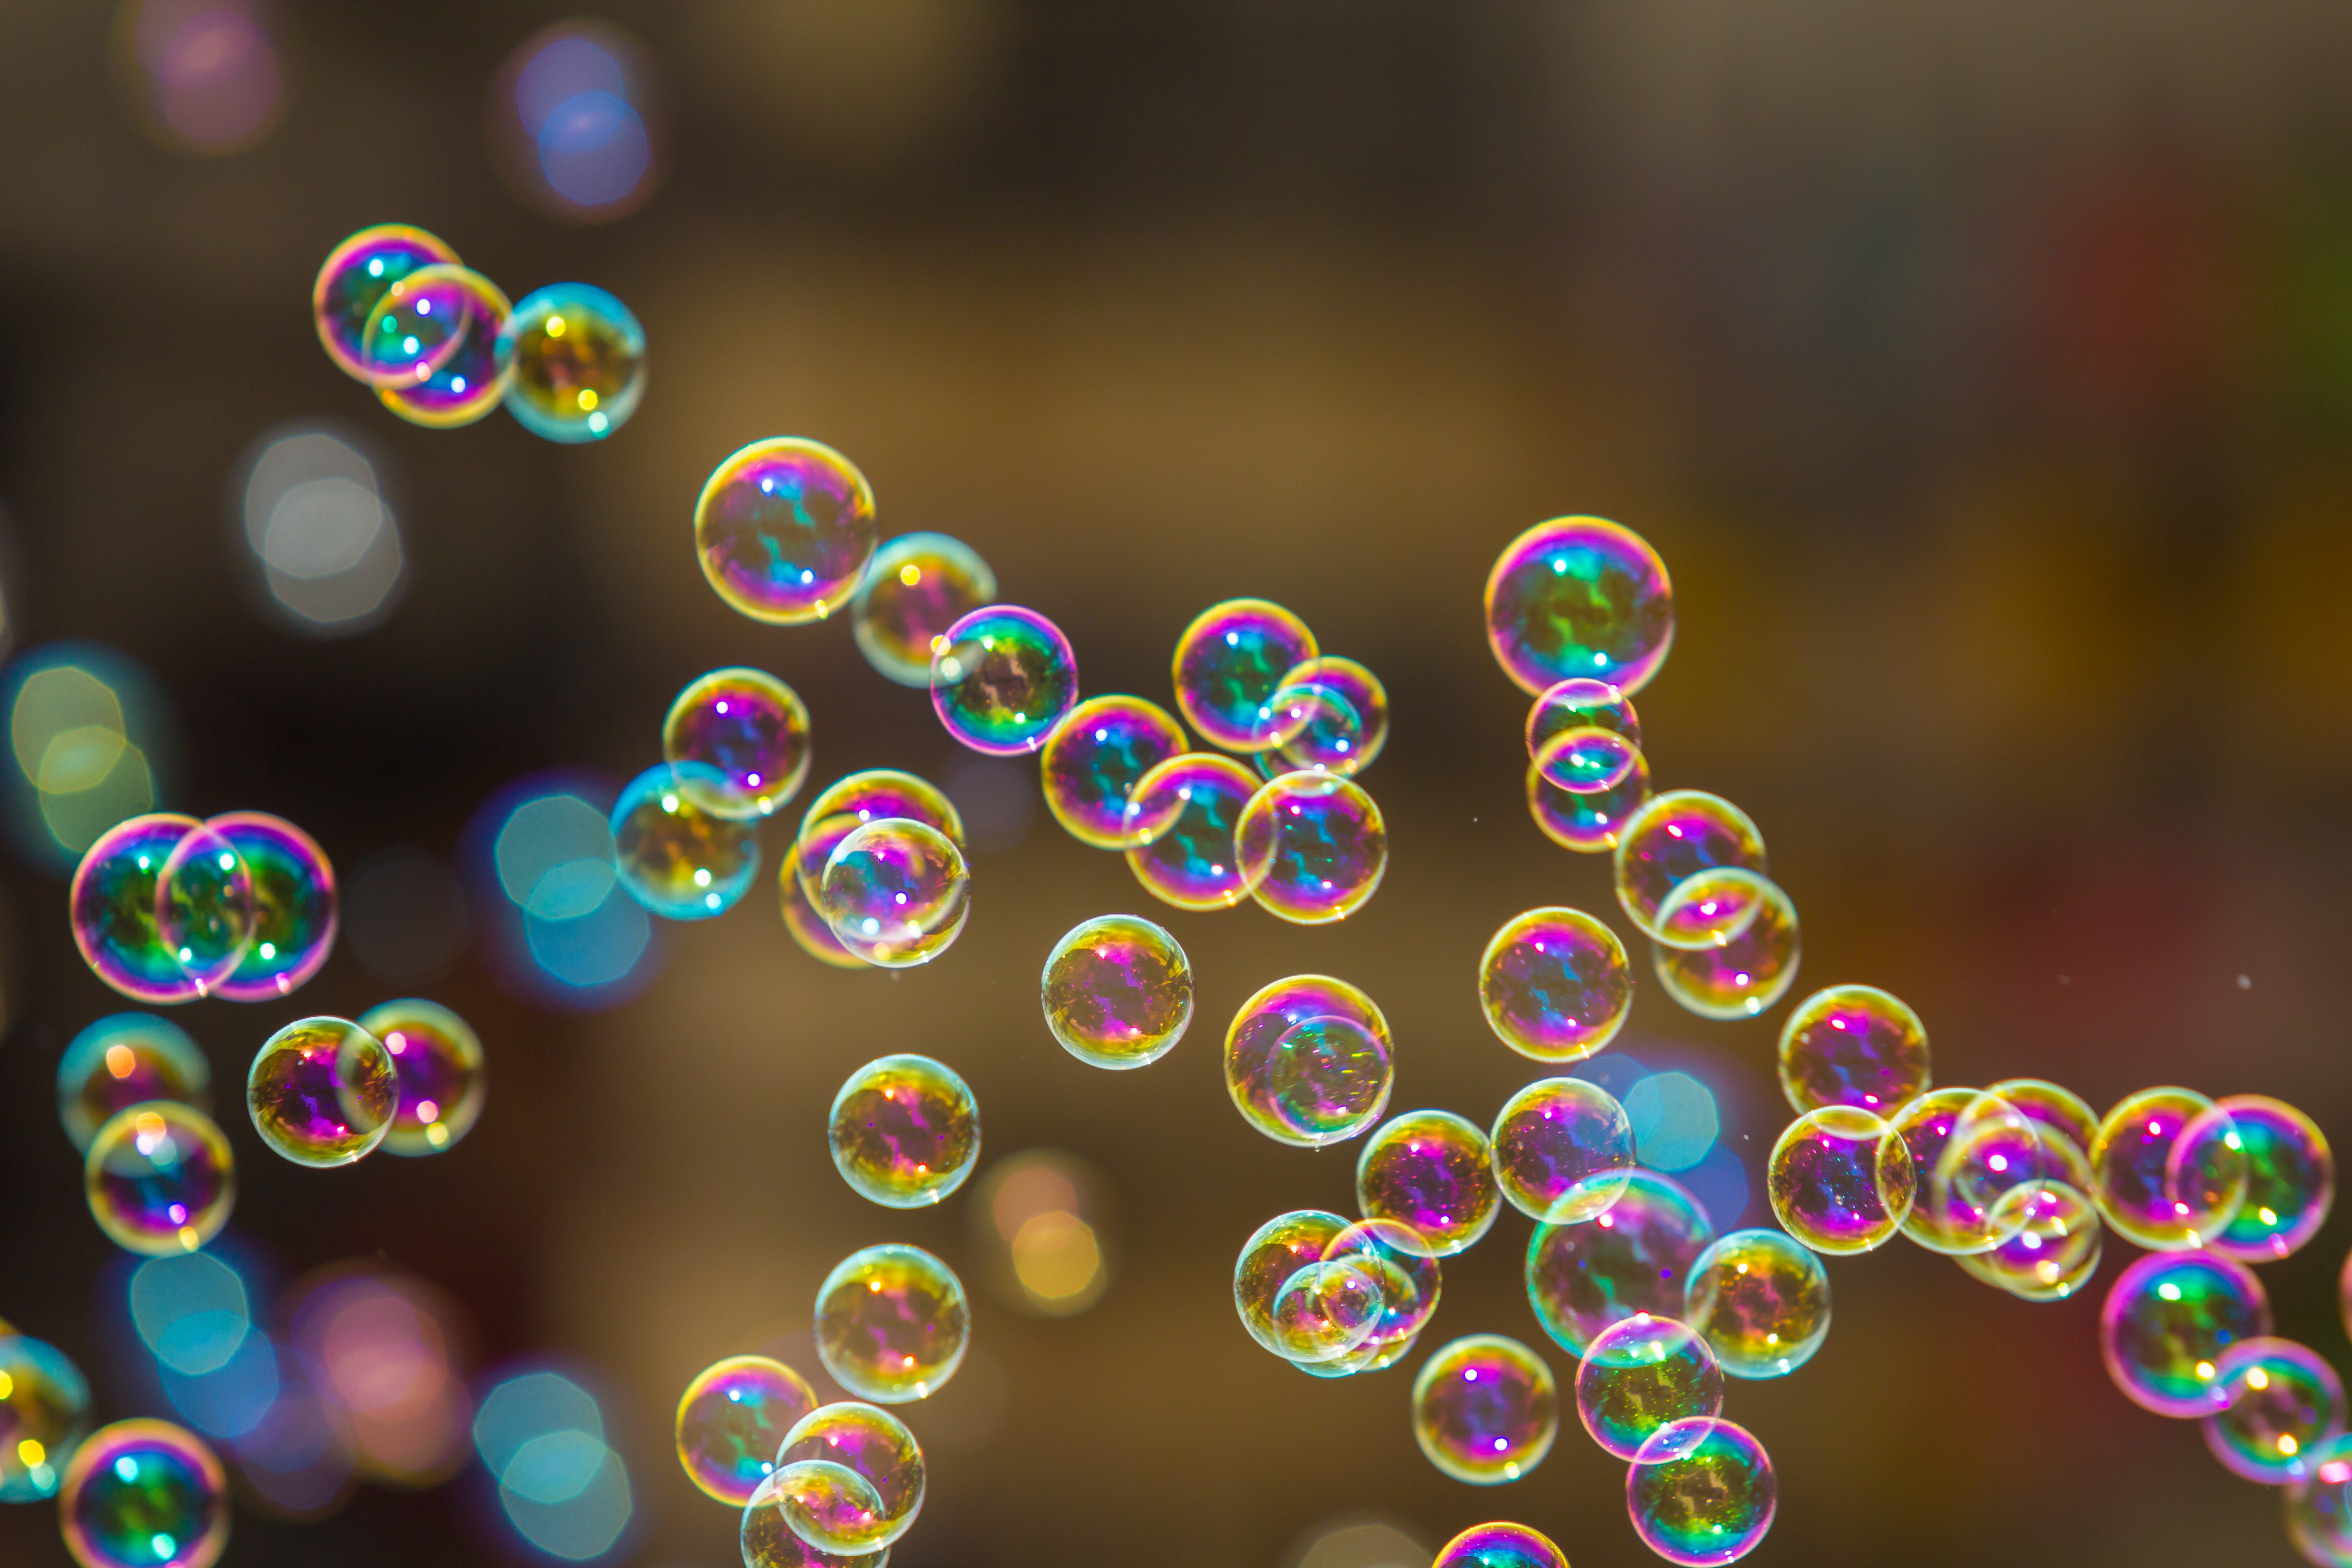 The rainbow soap bubbles from the bubble blower.